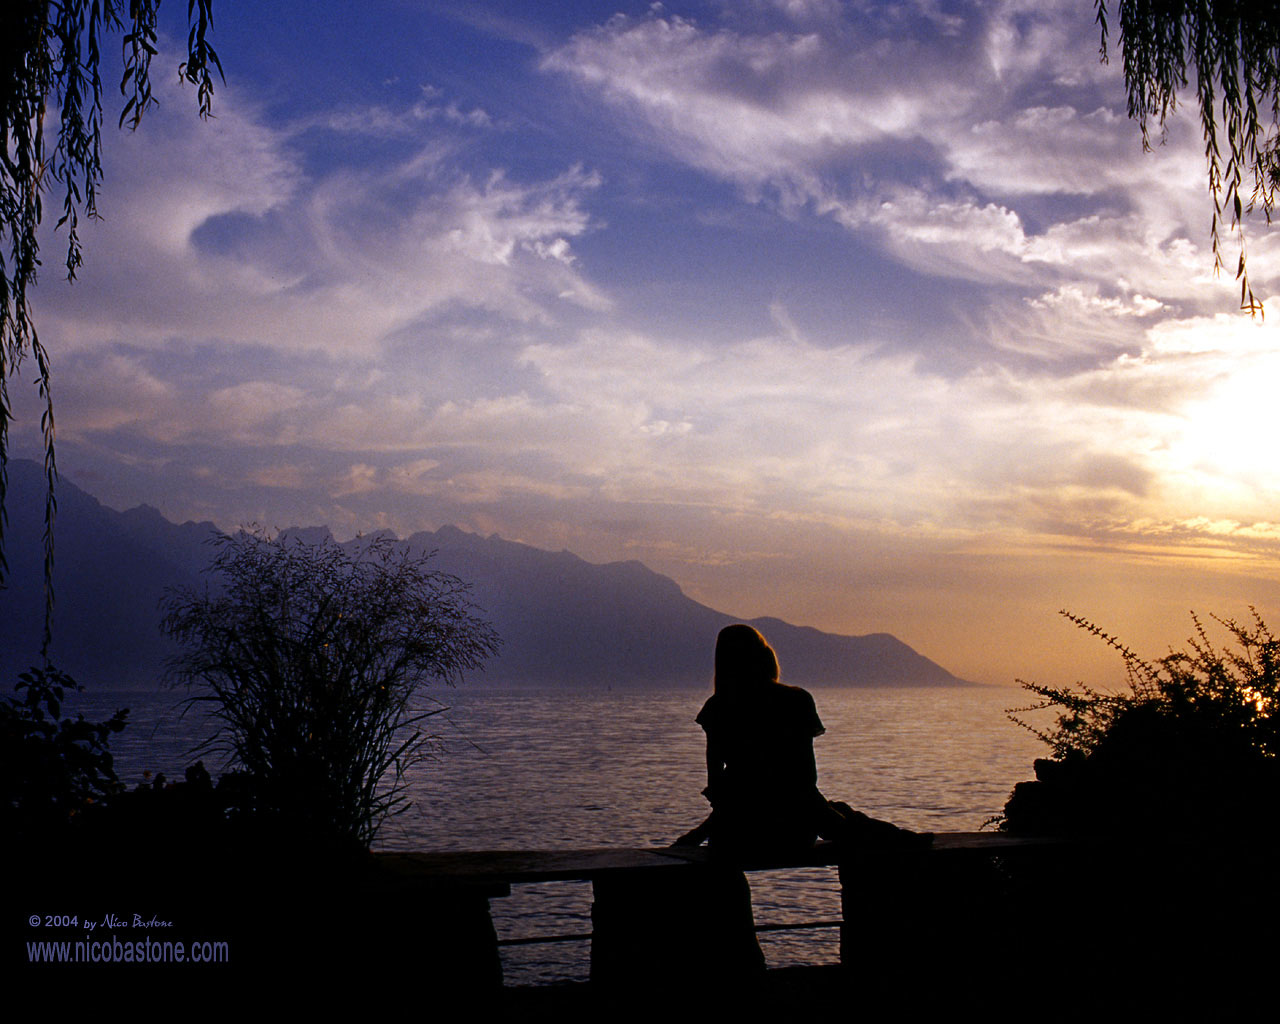 Montreux Wallpaper 1280x1024 - Copyright by Nico Bastone. All Rights Reserved